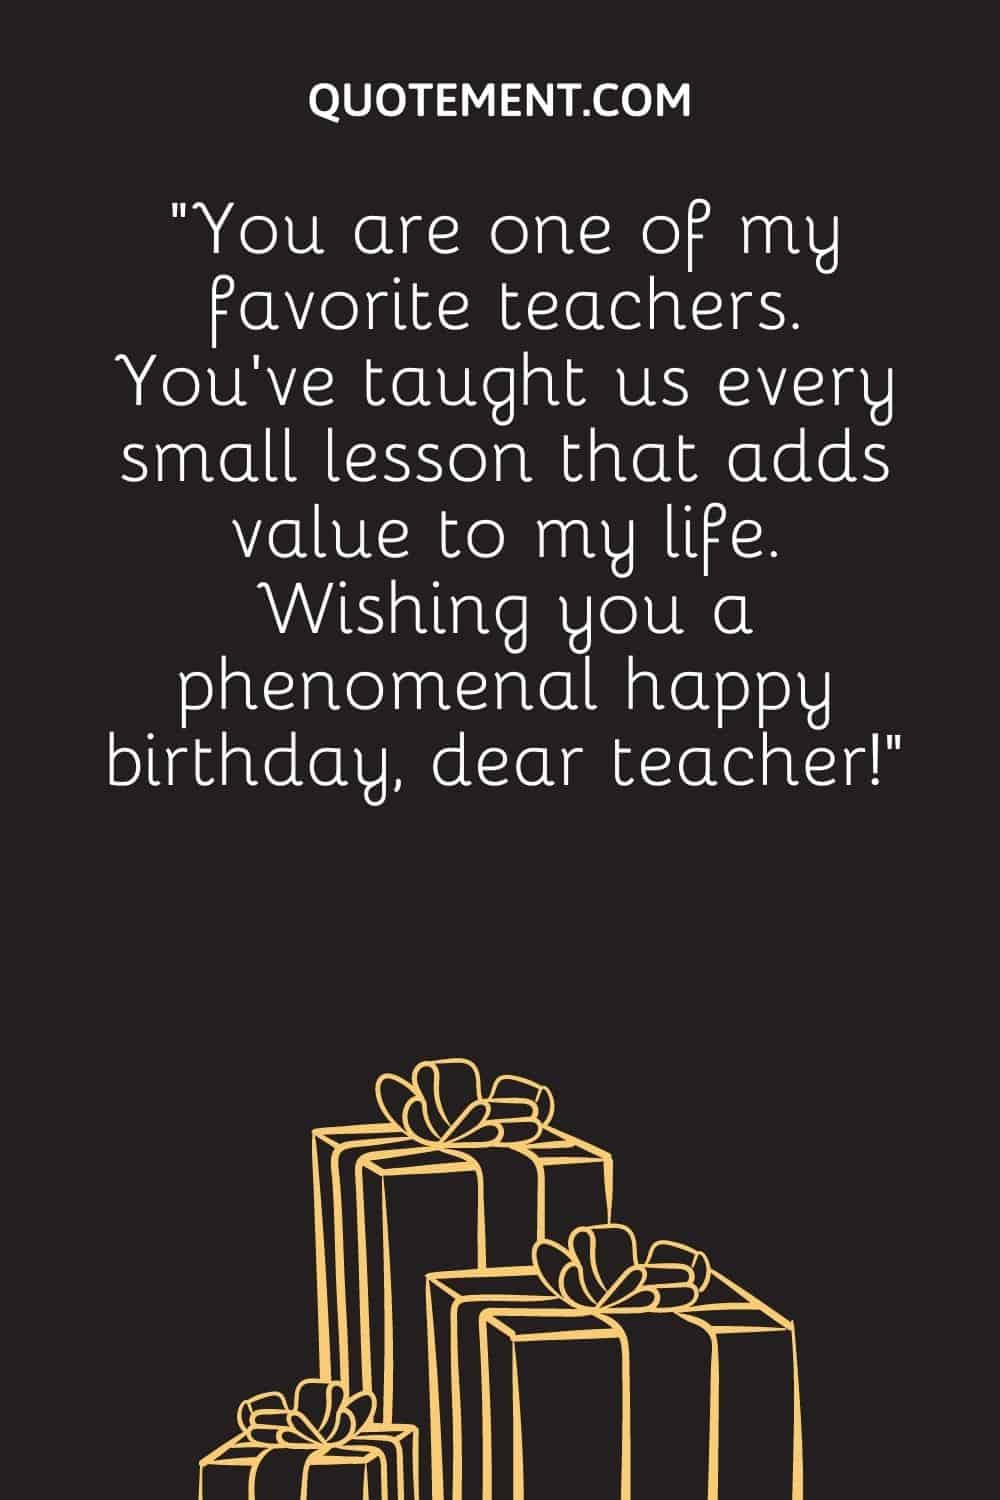 “You are one of my favorite teachers. You’ve taught us every small lesson that adds value to my life. Wishing you a phenomenal happy birthday, dear teacher!”